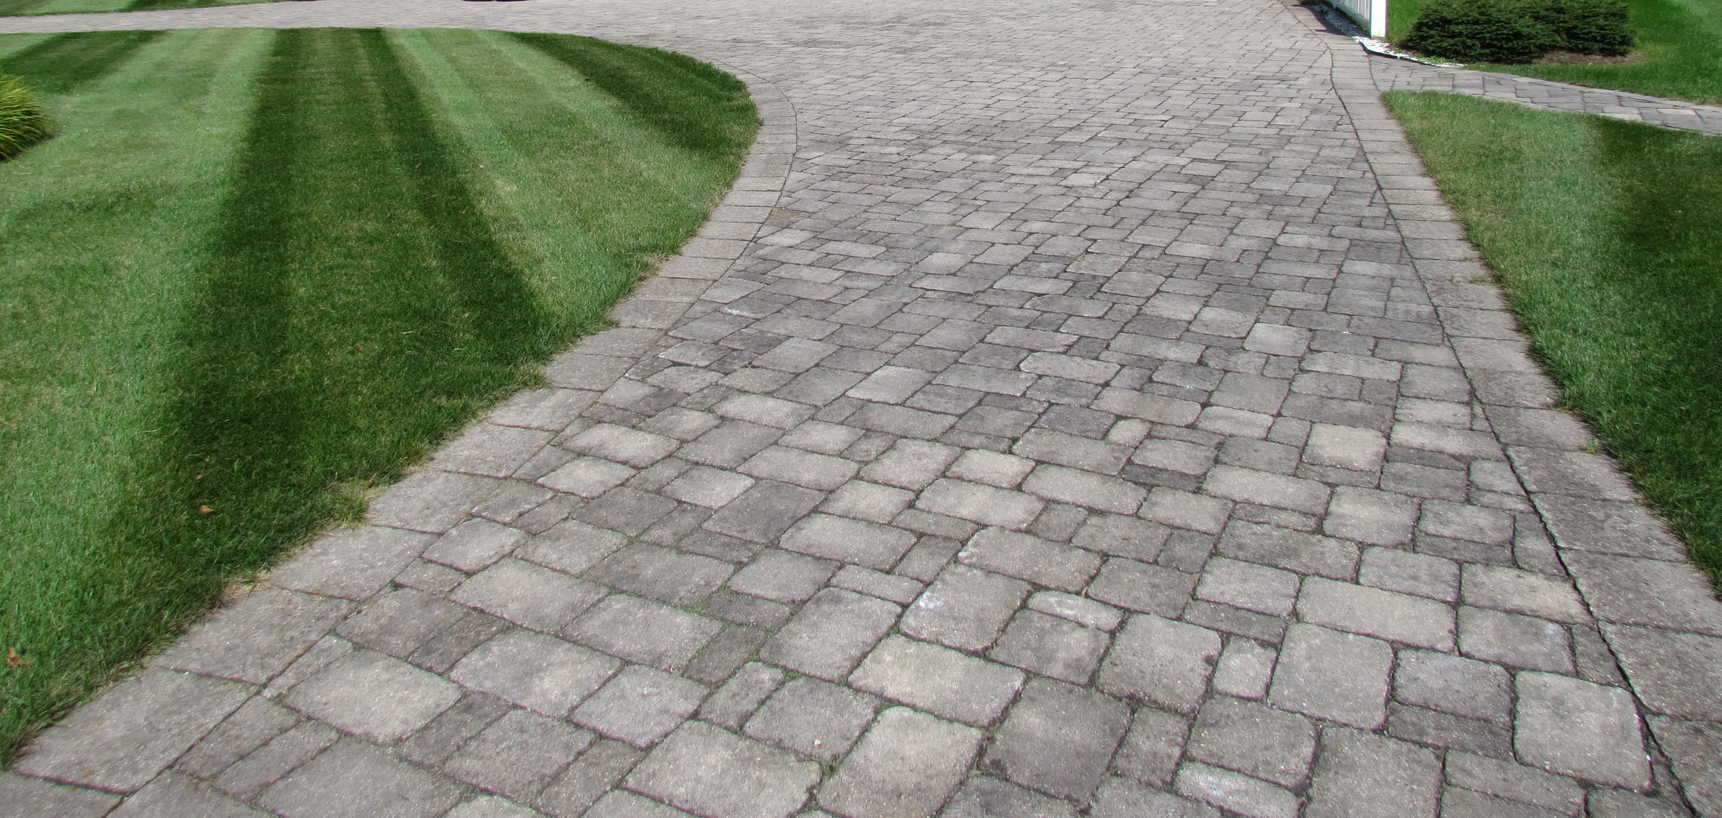 Durability of paver driveways after years of VT ice & snow